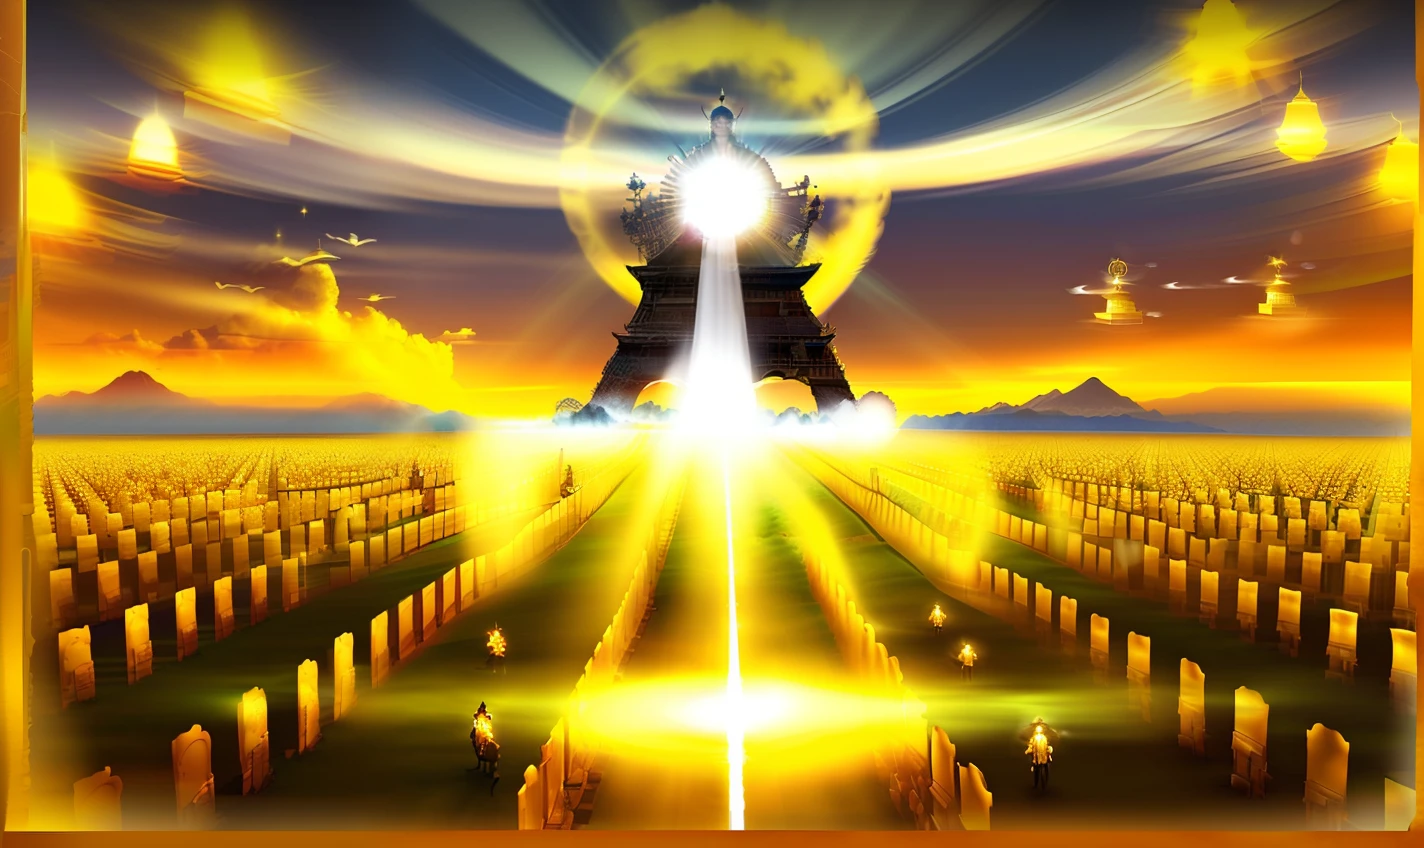 a group of people standing in a field with a light shining on them, Spirits coming out of a great throne, many beings walking about, seres de estrutura espantosa, Os Annunaki Fazendo Humanos, seres de tecnologia luminosa, Abrindo um portal brilhante, heavens gate, gold gates of heaven!!!!!!!!, she is arriving heaven, Segunda vinda, energetic beings patrolling